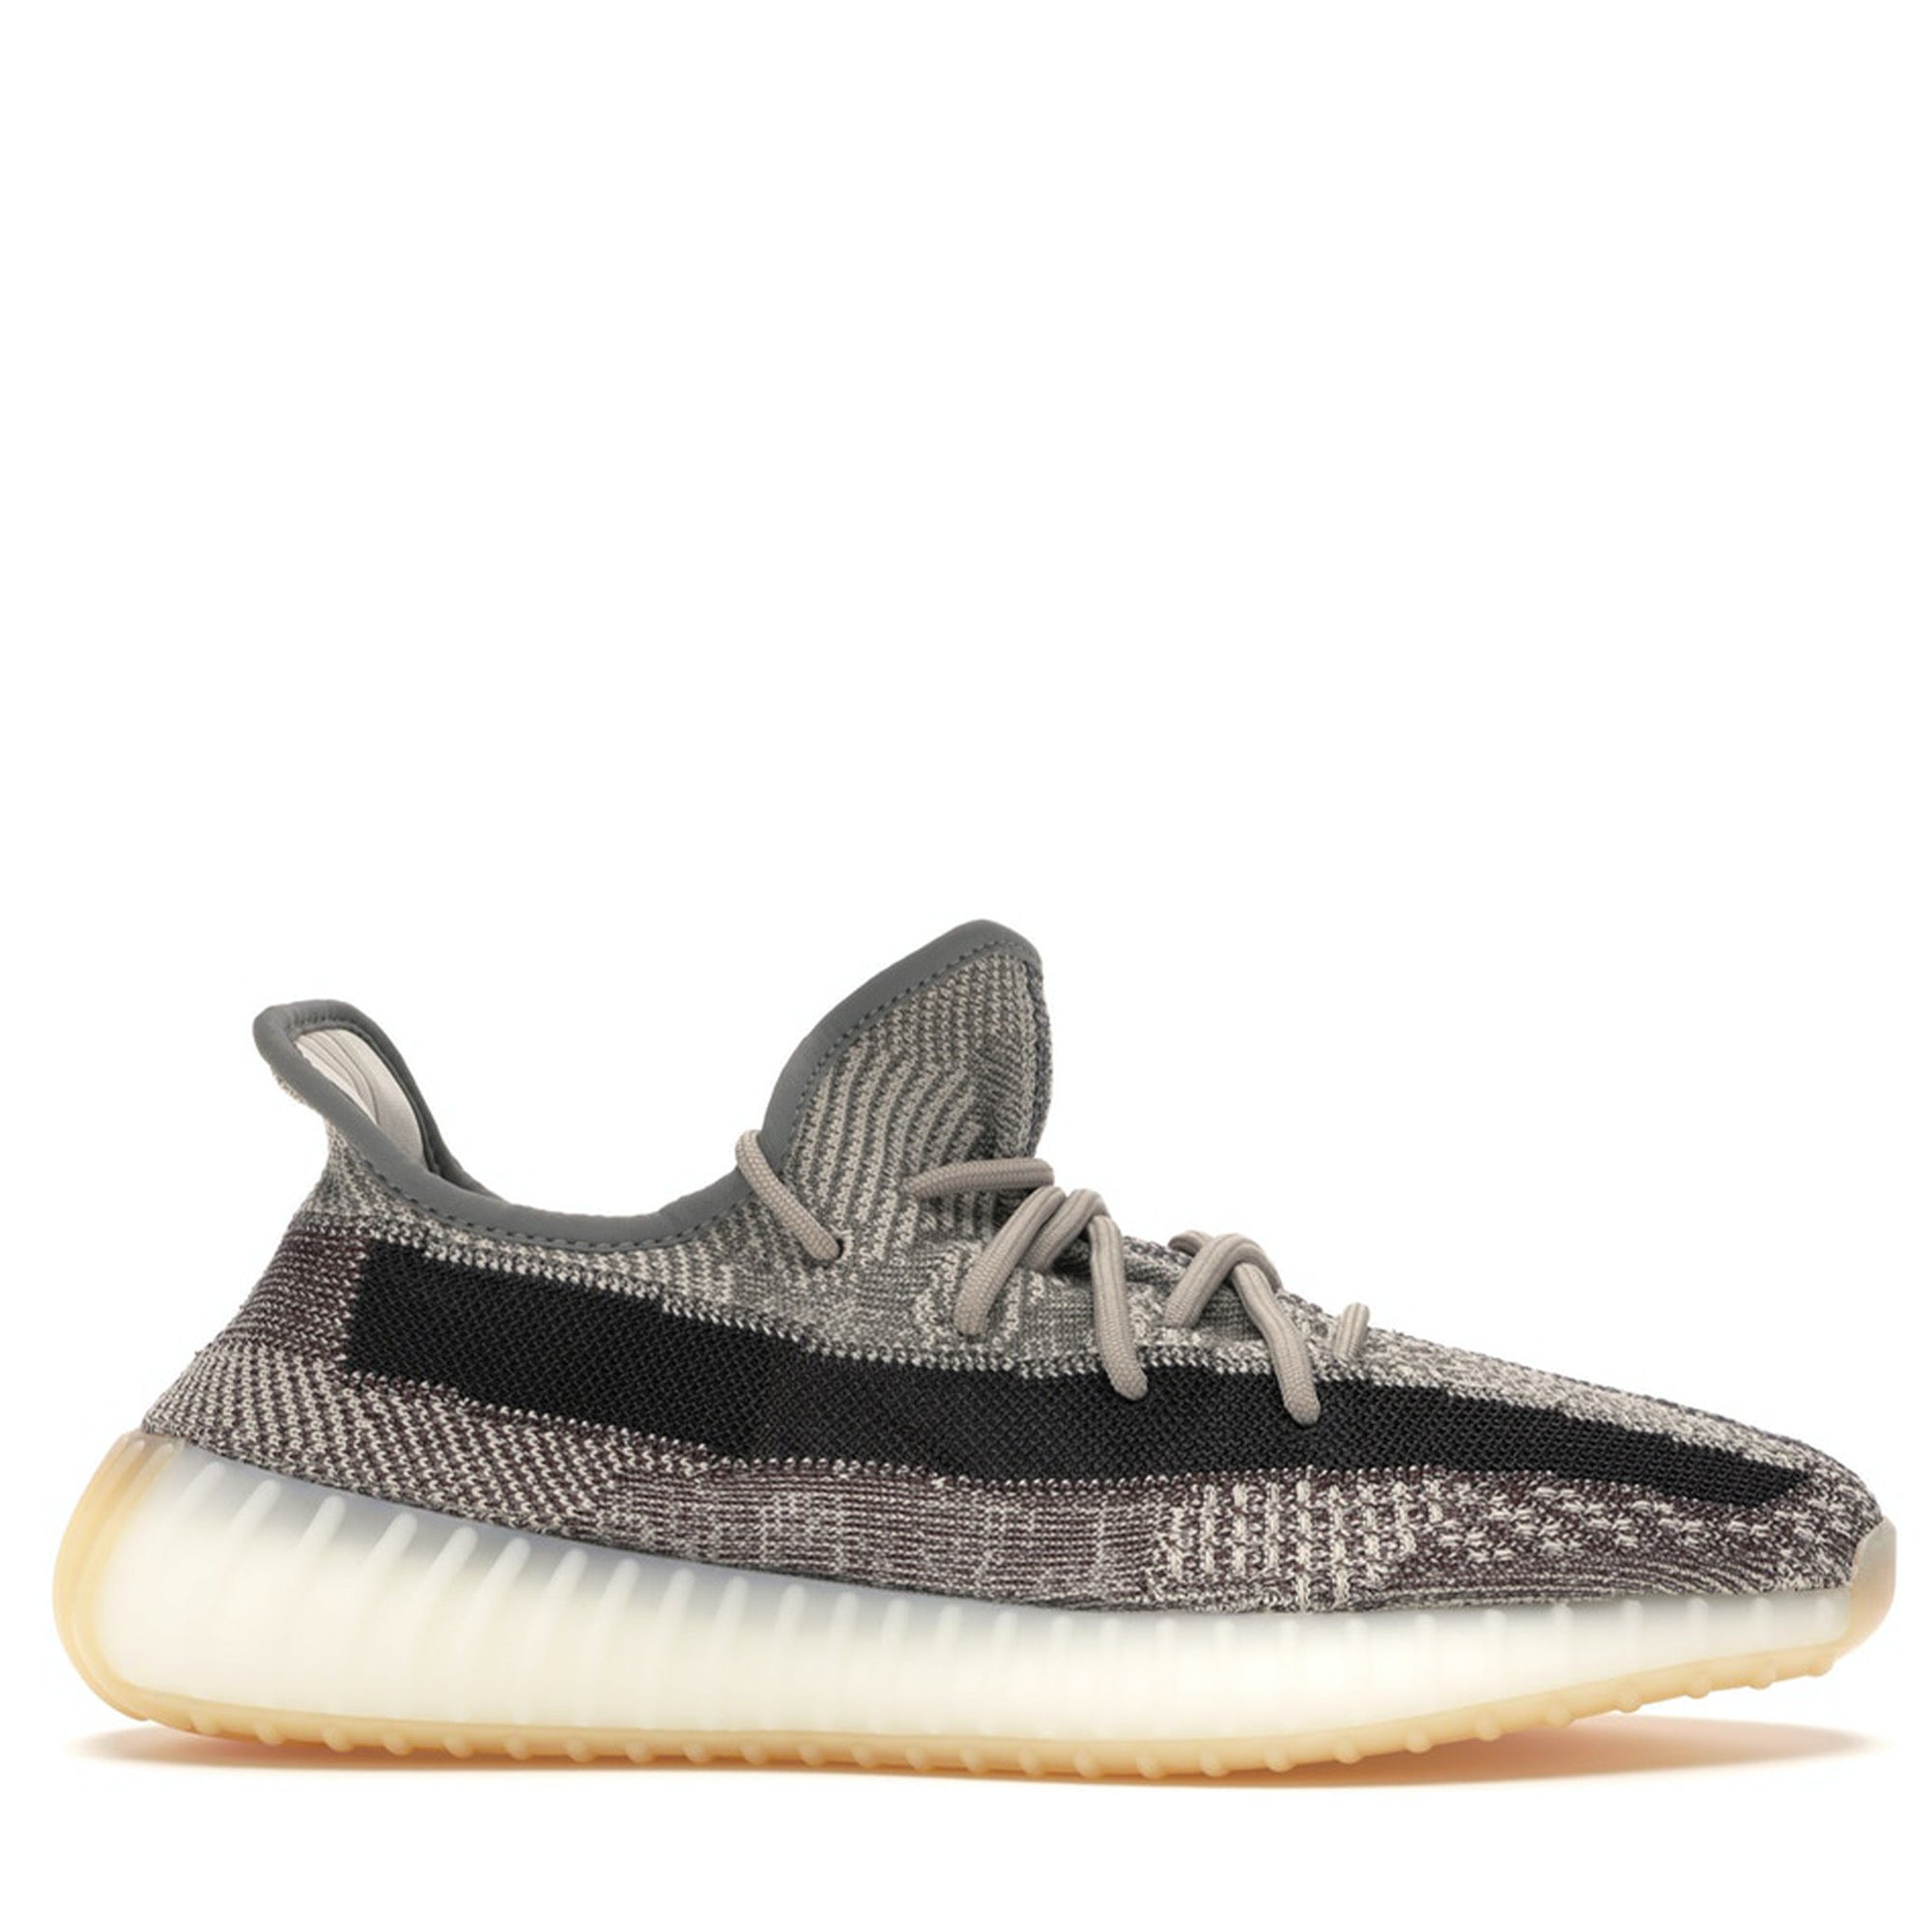 yeezy shoes vancouver